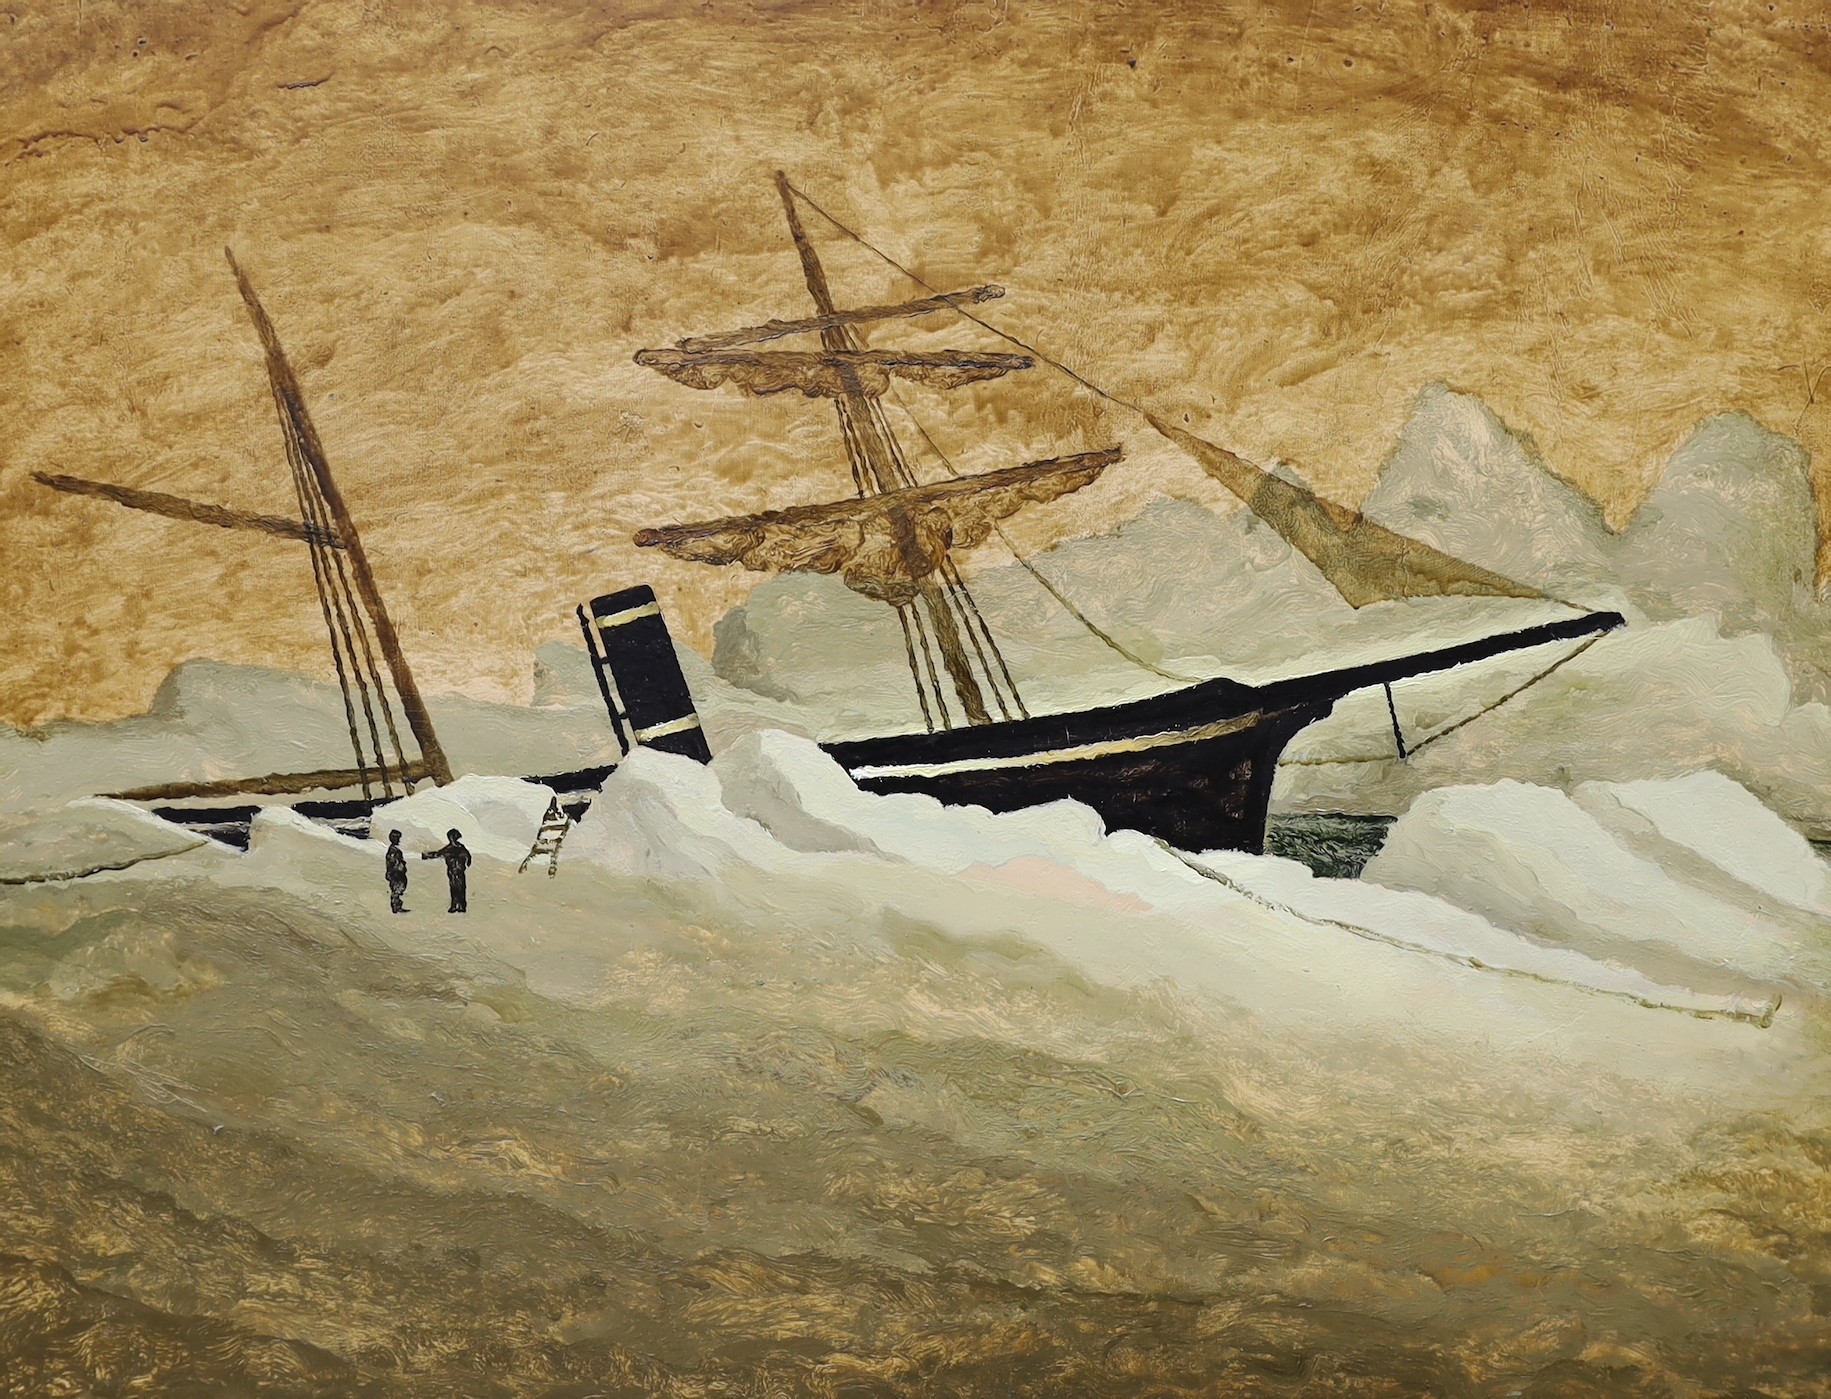 F. Ramiro, oil on canvas, 'I've never been at the Nord Pole', signed and dated 1995 verso, 98 x 131cm, unframed